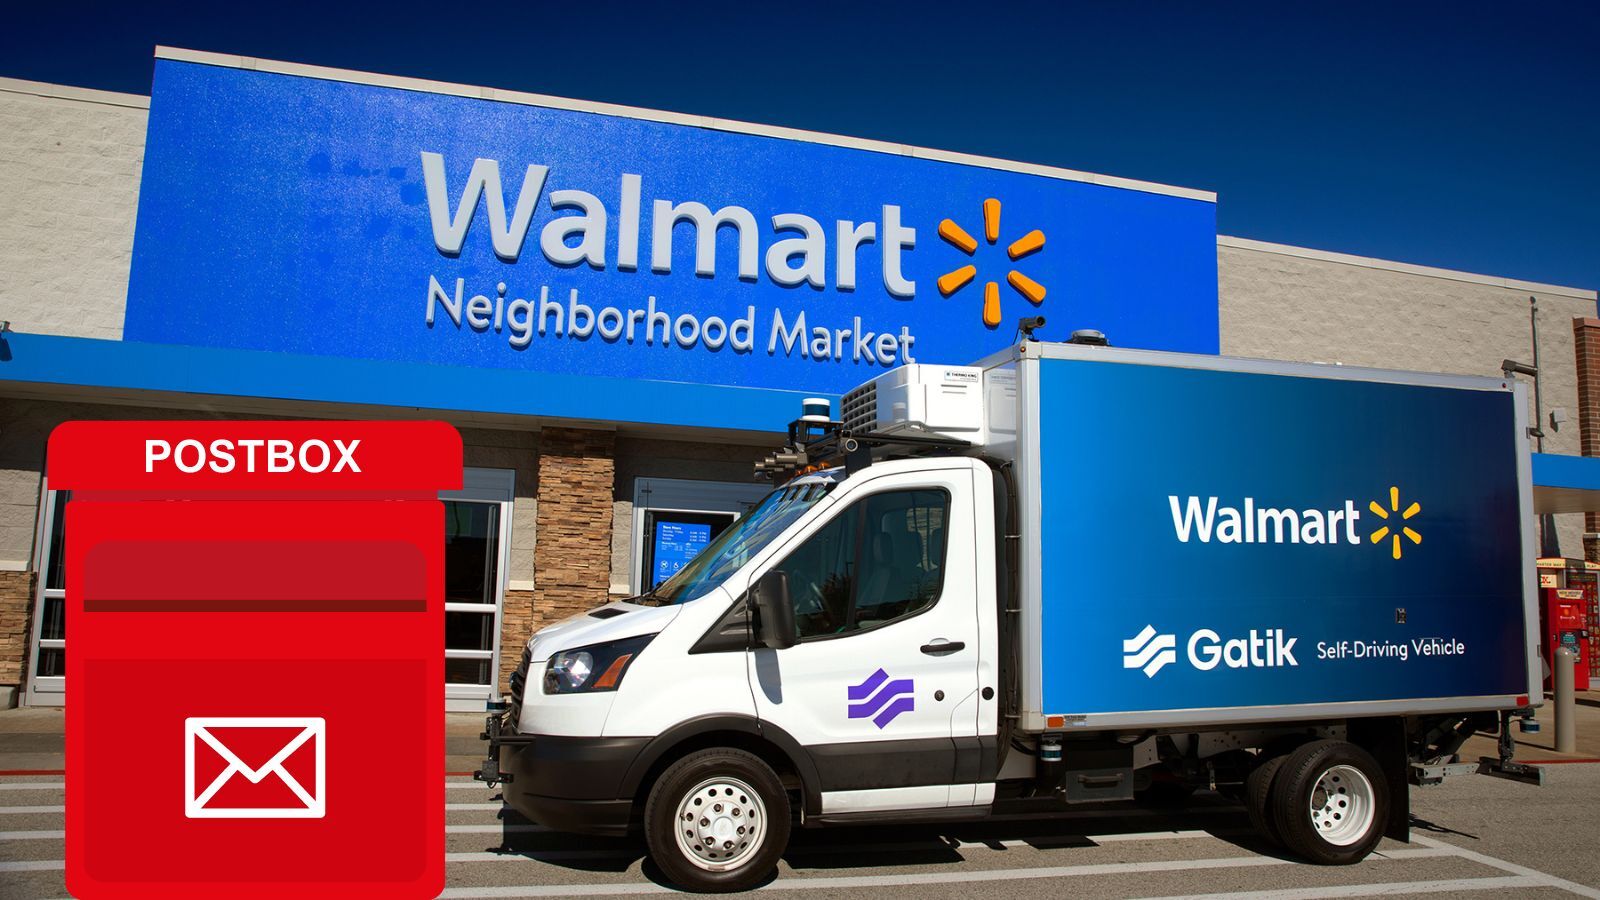 Does Walmart Deliver To P.O. Boxes? (No, But You Can Try This)